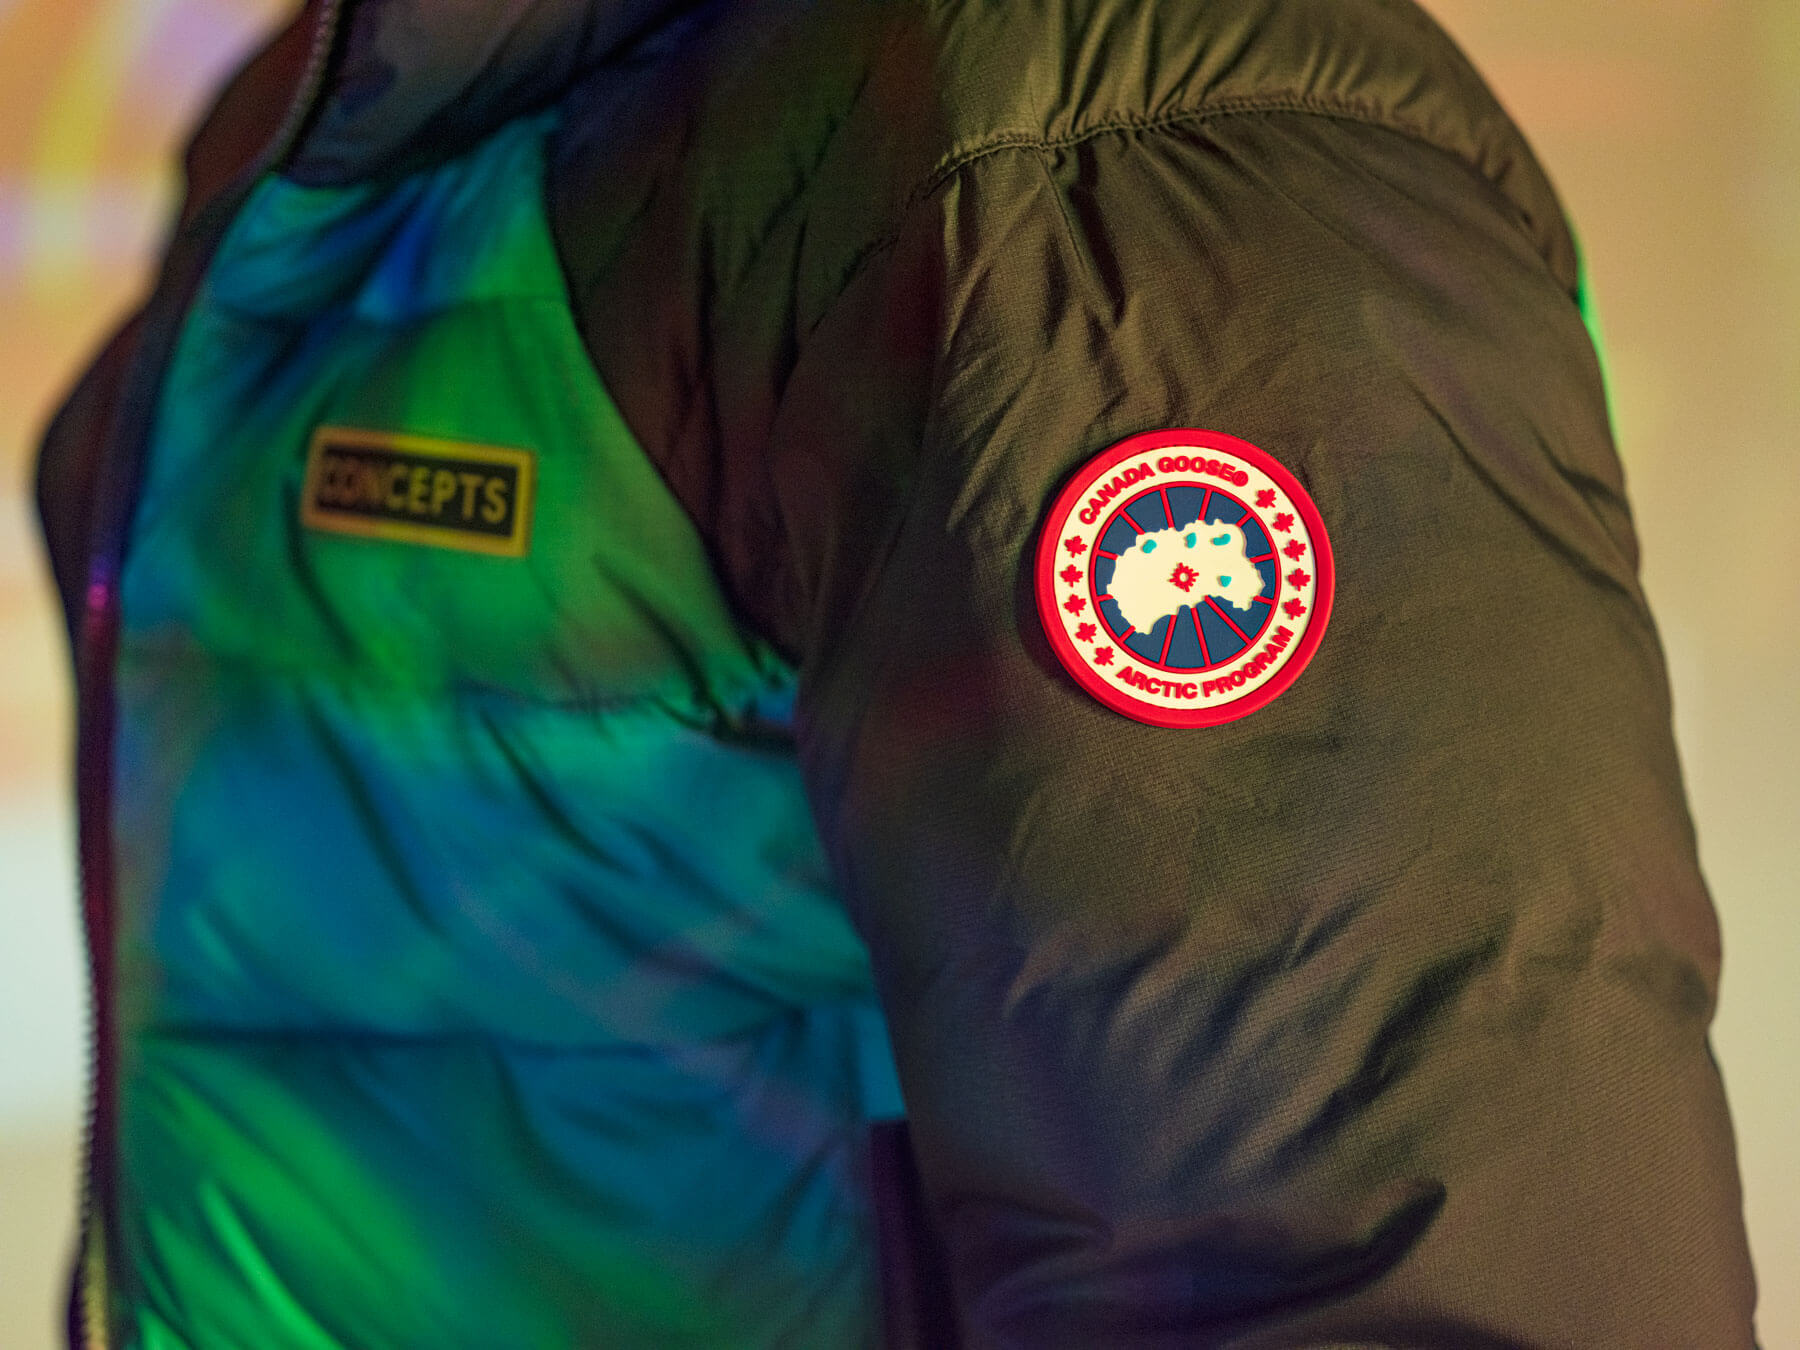 Canada Goose x Concepts Winter 2019 Collection